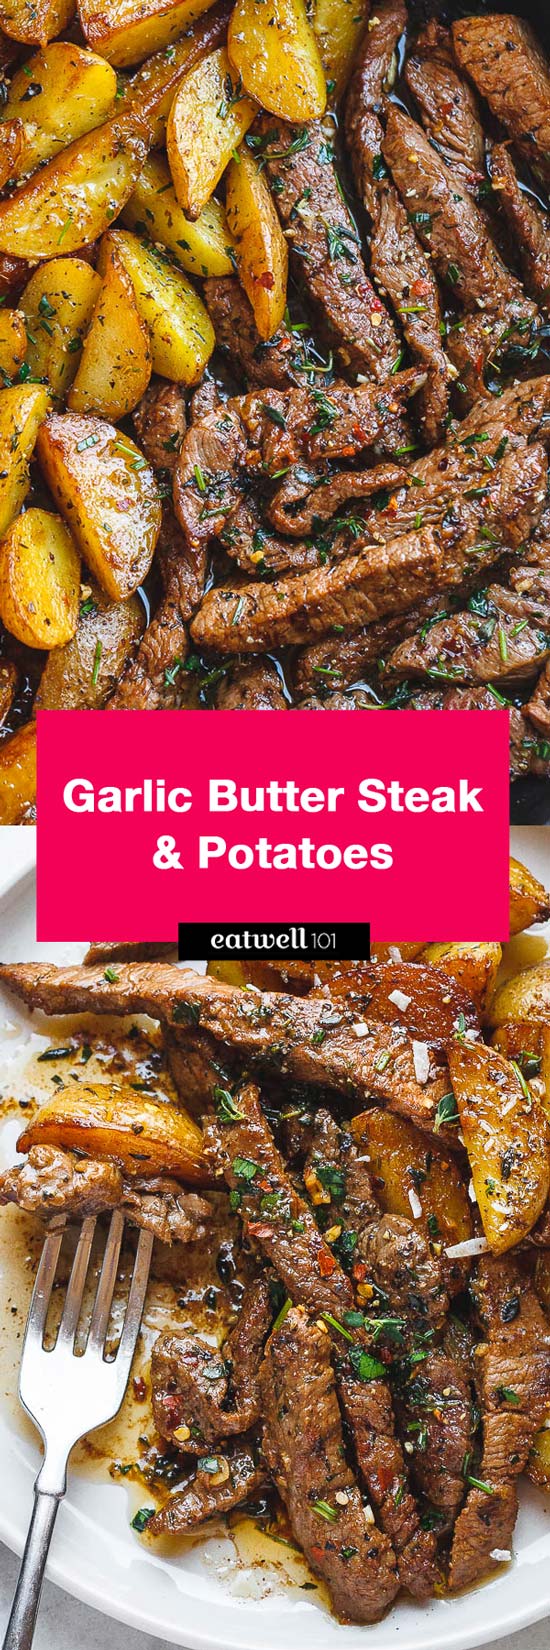 Garlic Butter Steak and Potatoes Skillet -  #eatwell101 #recipe This easy one-pan recipe is SO simple, and SO flavorful. The best steak and potatoes you'll ever have! #Garlic #Butter #Steak and #Potatoes #Skilletrecipe #onepan 